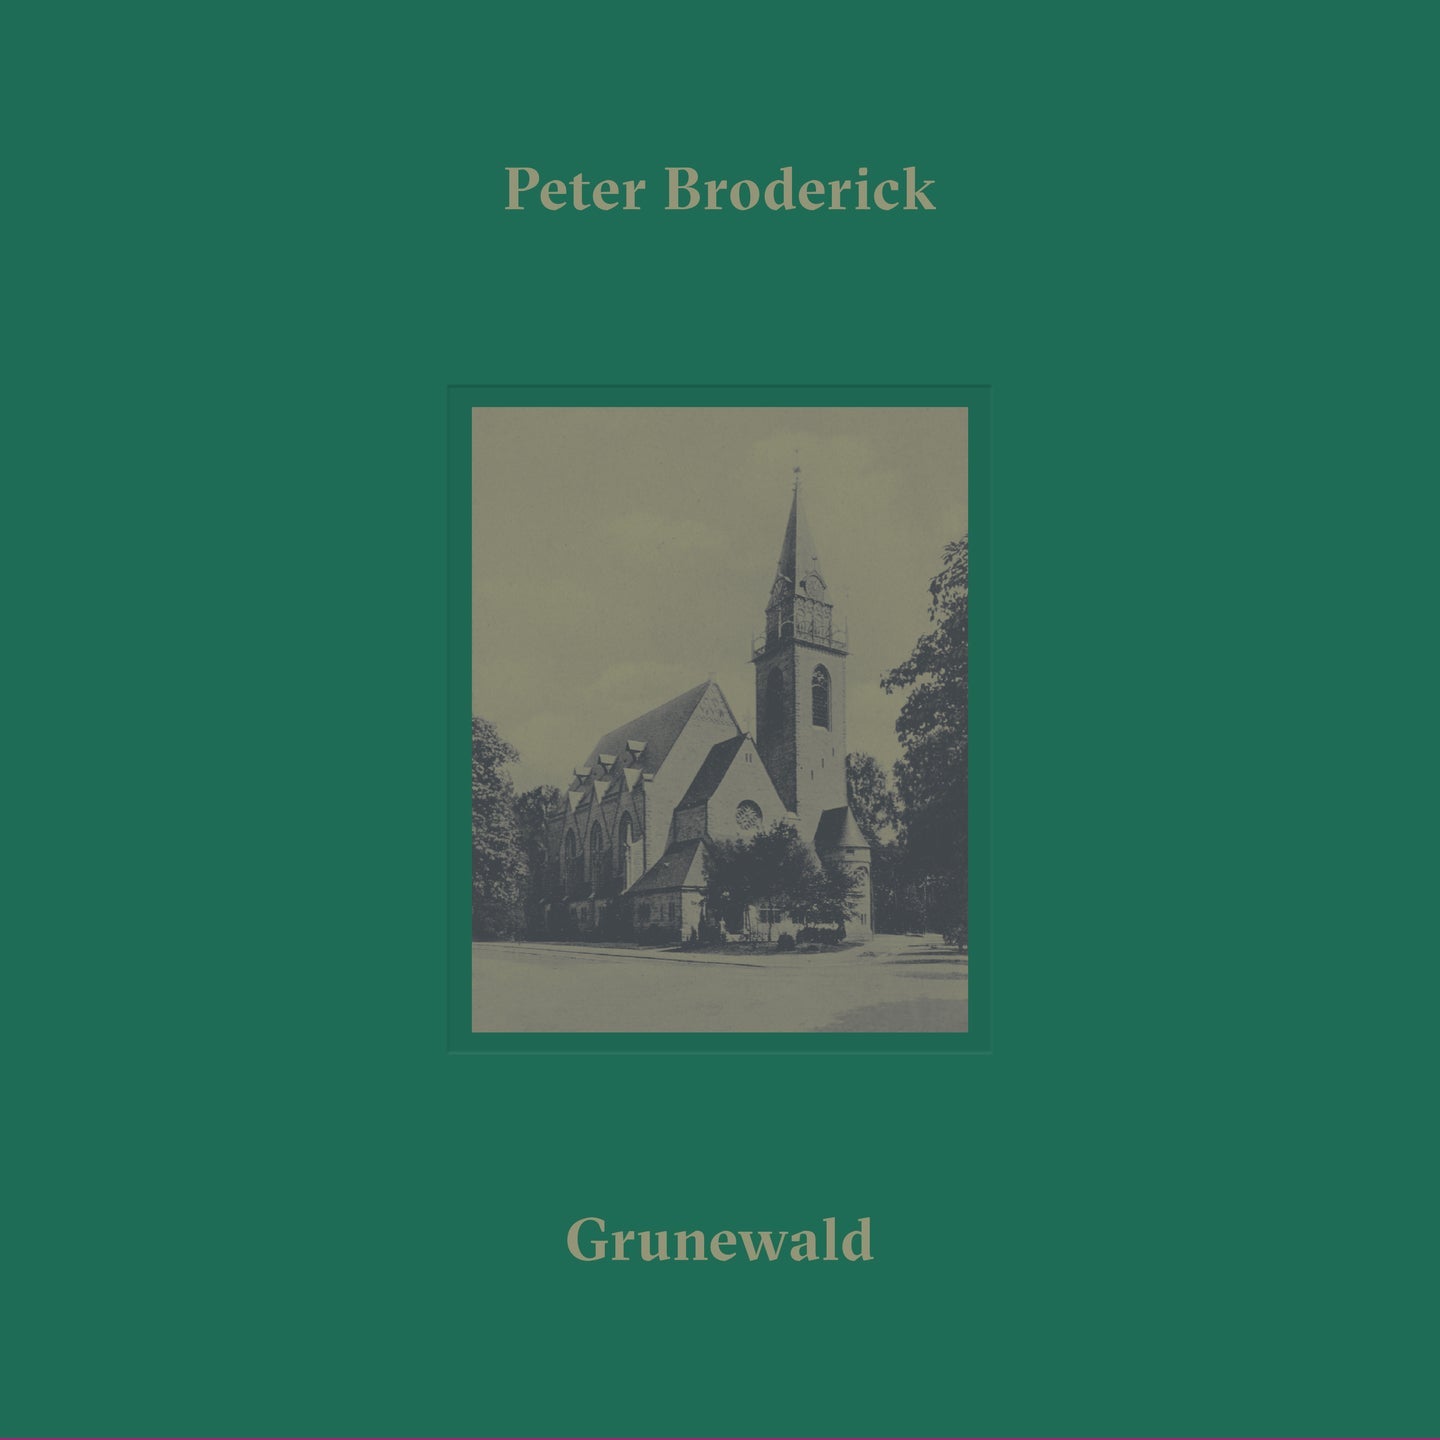 Arcade Sound - Peter Broderick - Grunewald EP front cover